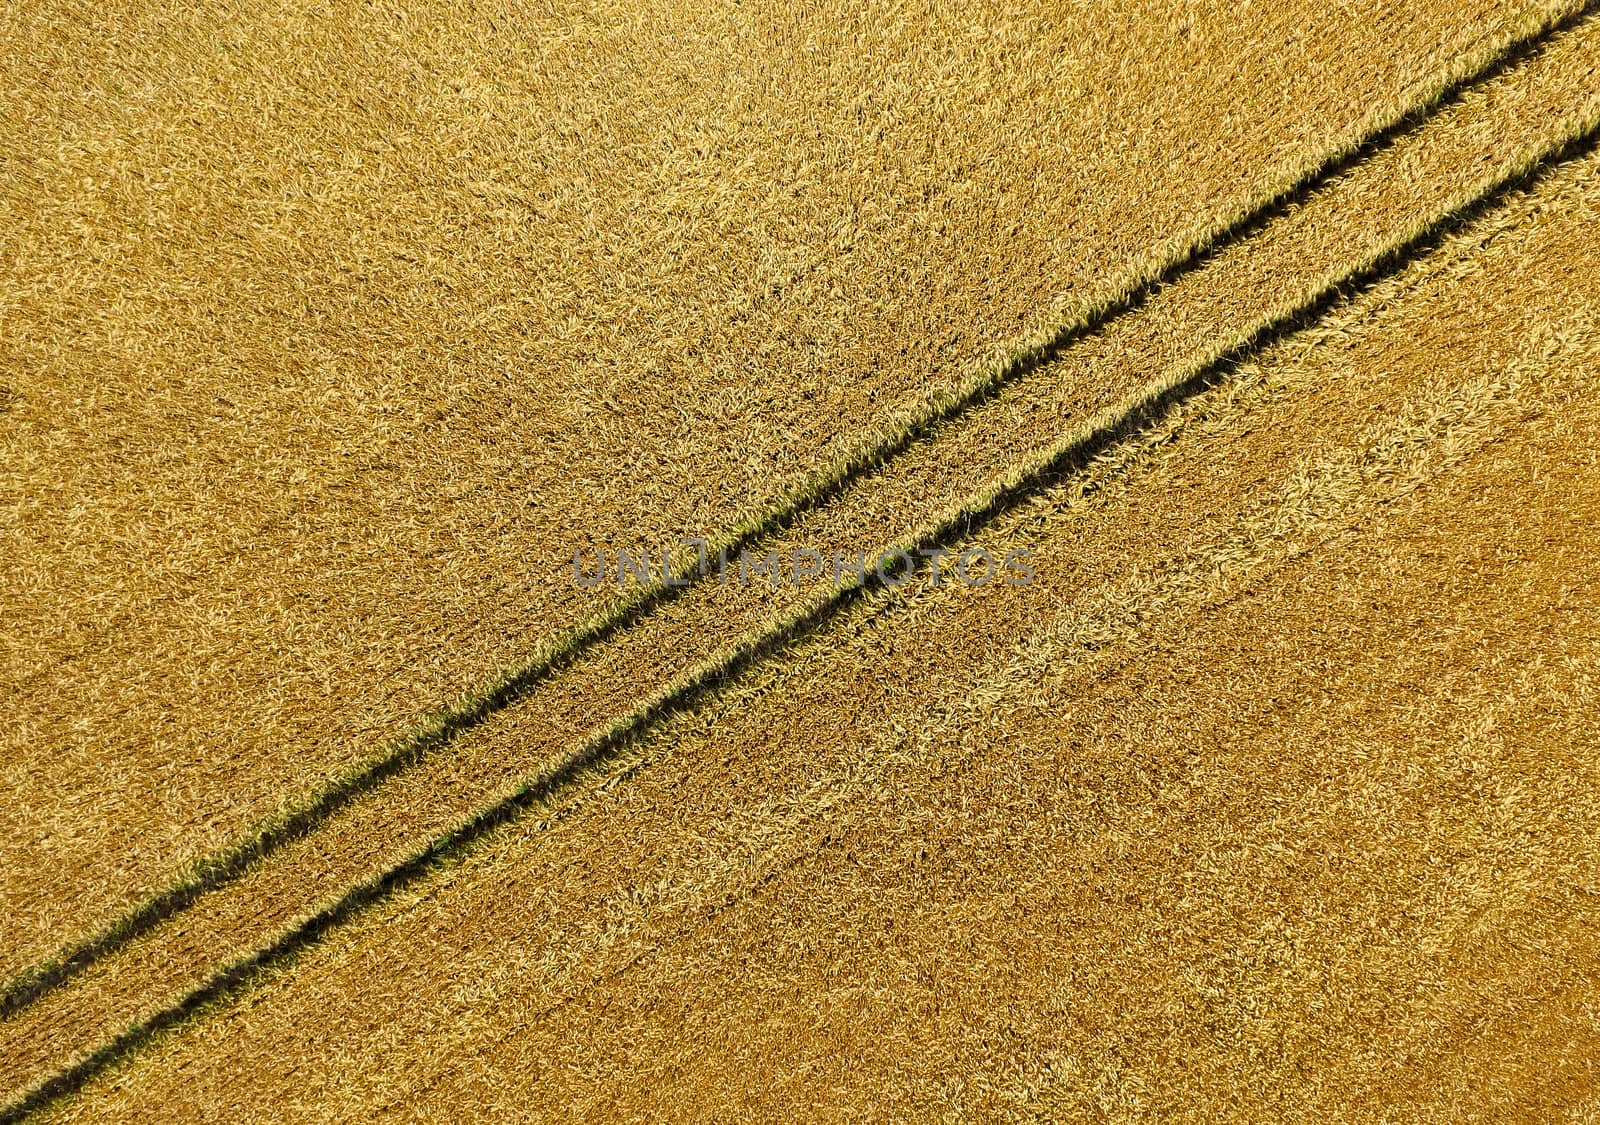 Aerial photo, abstract picture of a furrow in the field after th by geogif